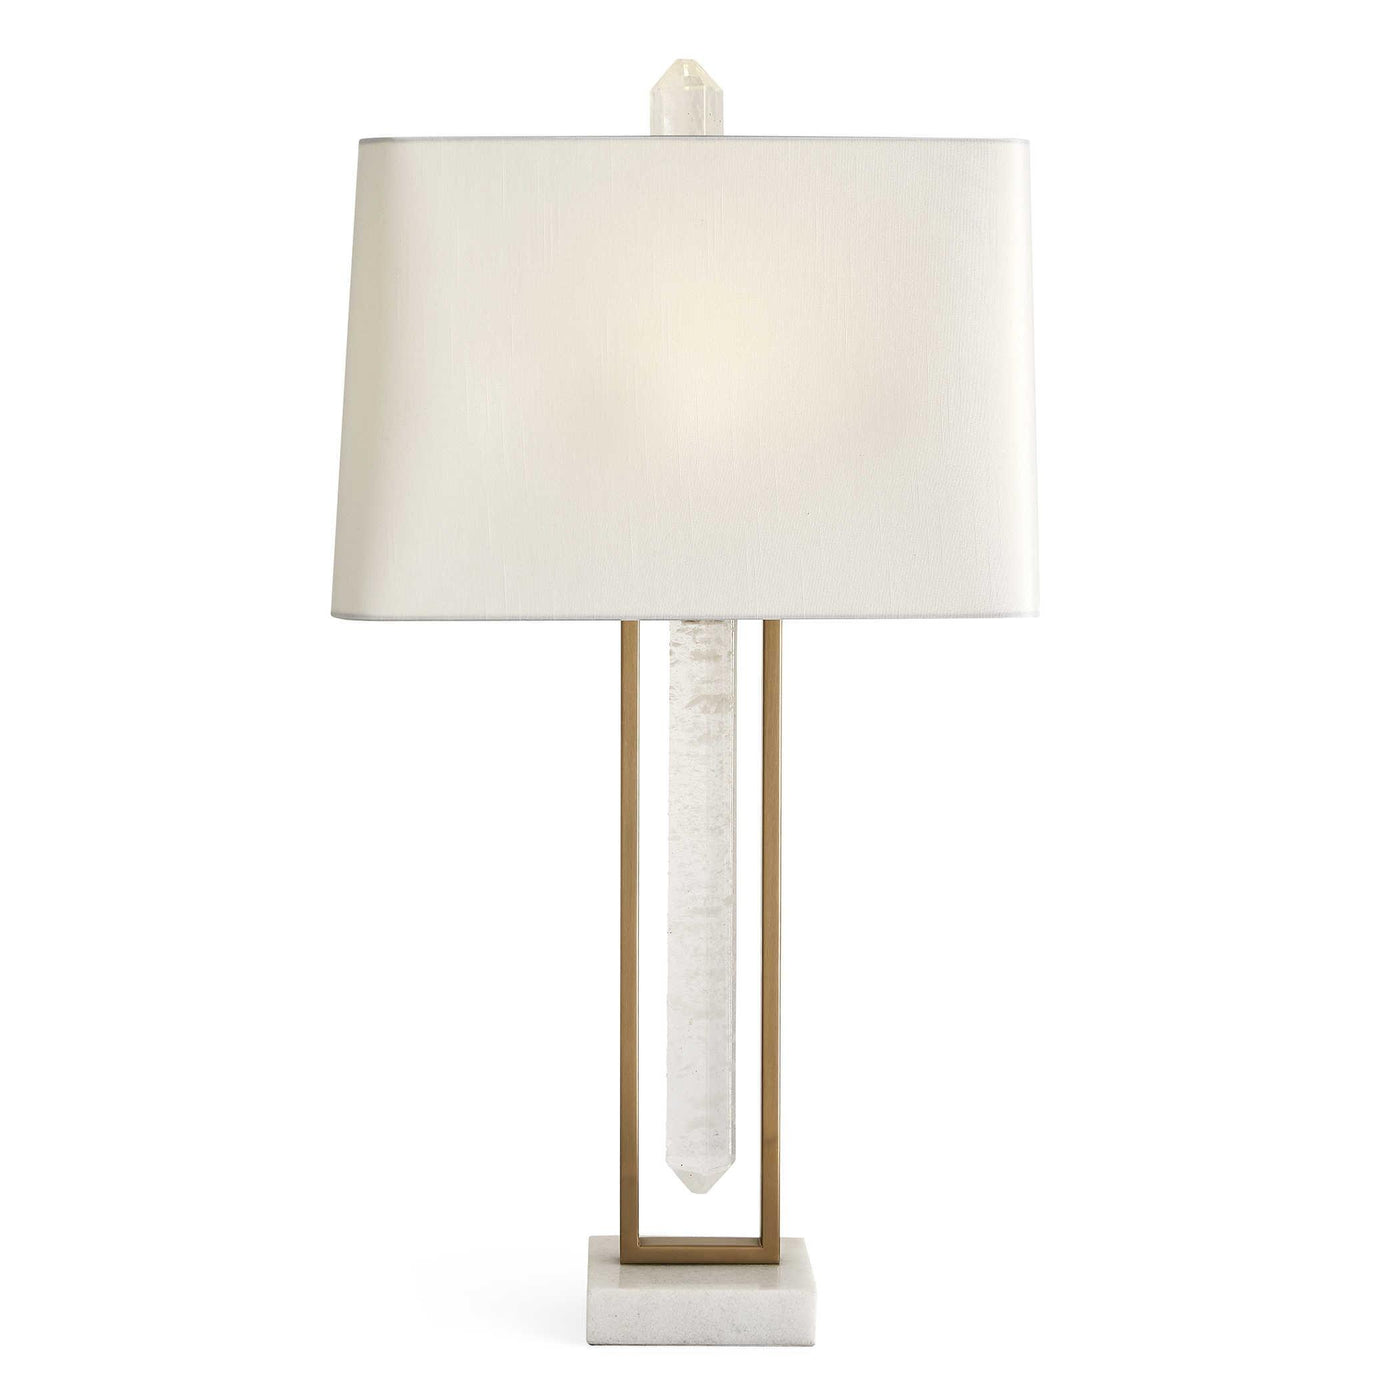 Black Label Jeweled Point Table Lamp